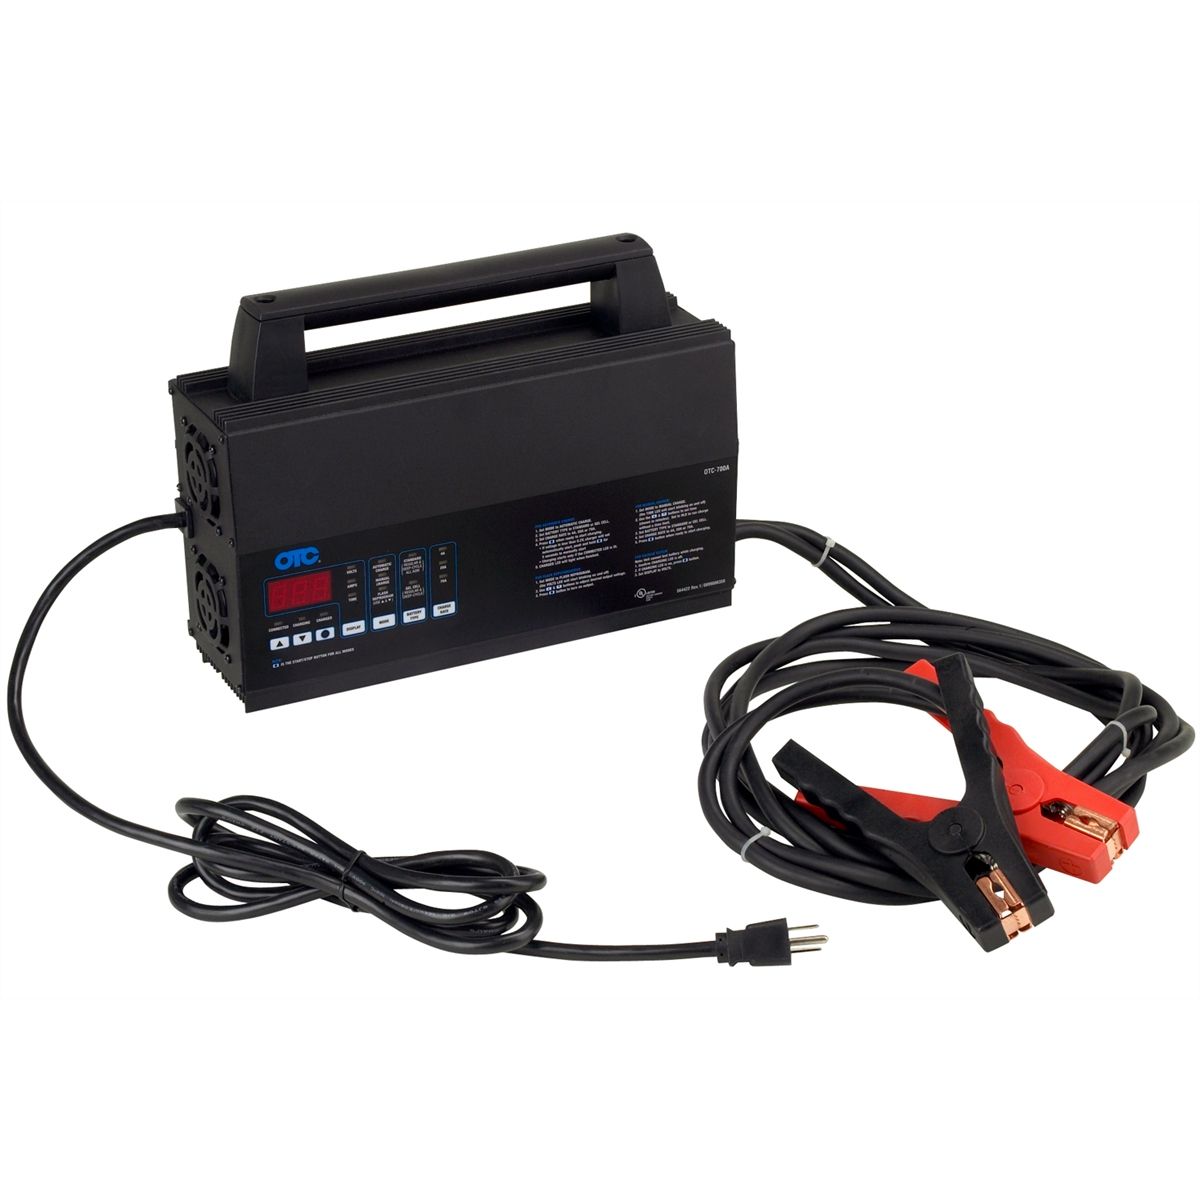 70 AMP Power Supply/Battery Charger